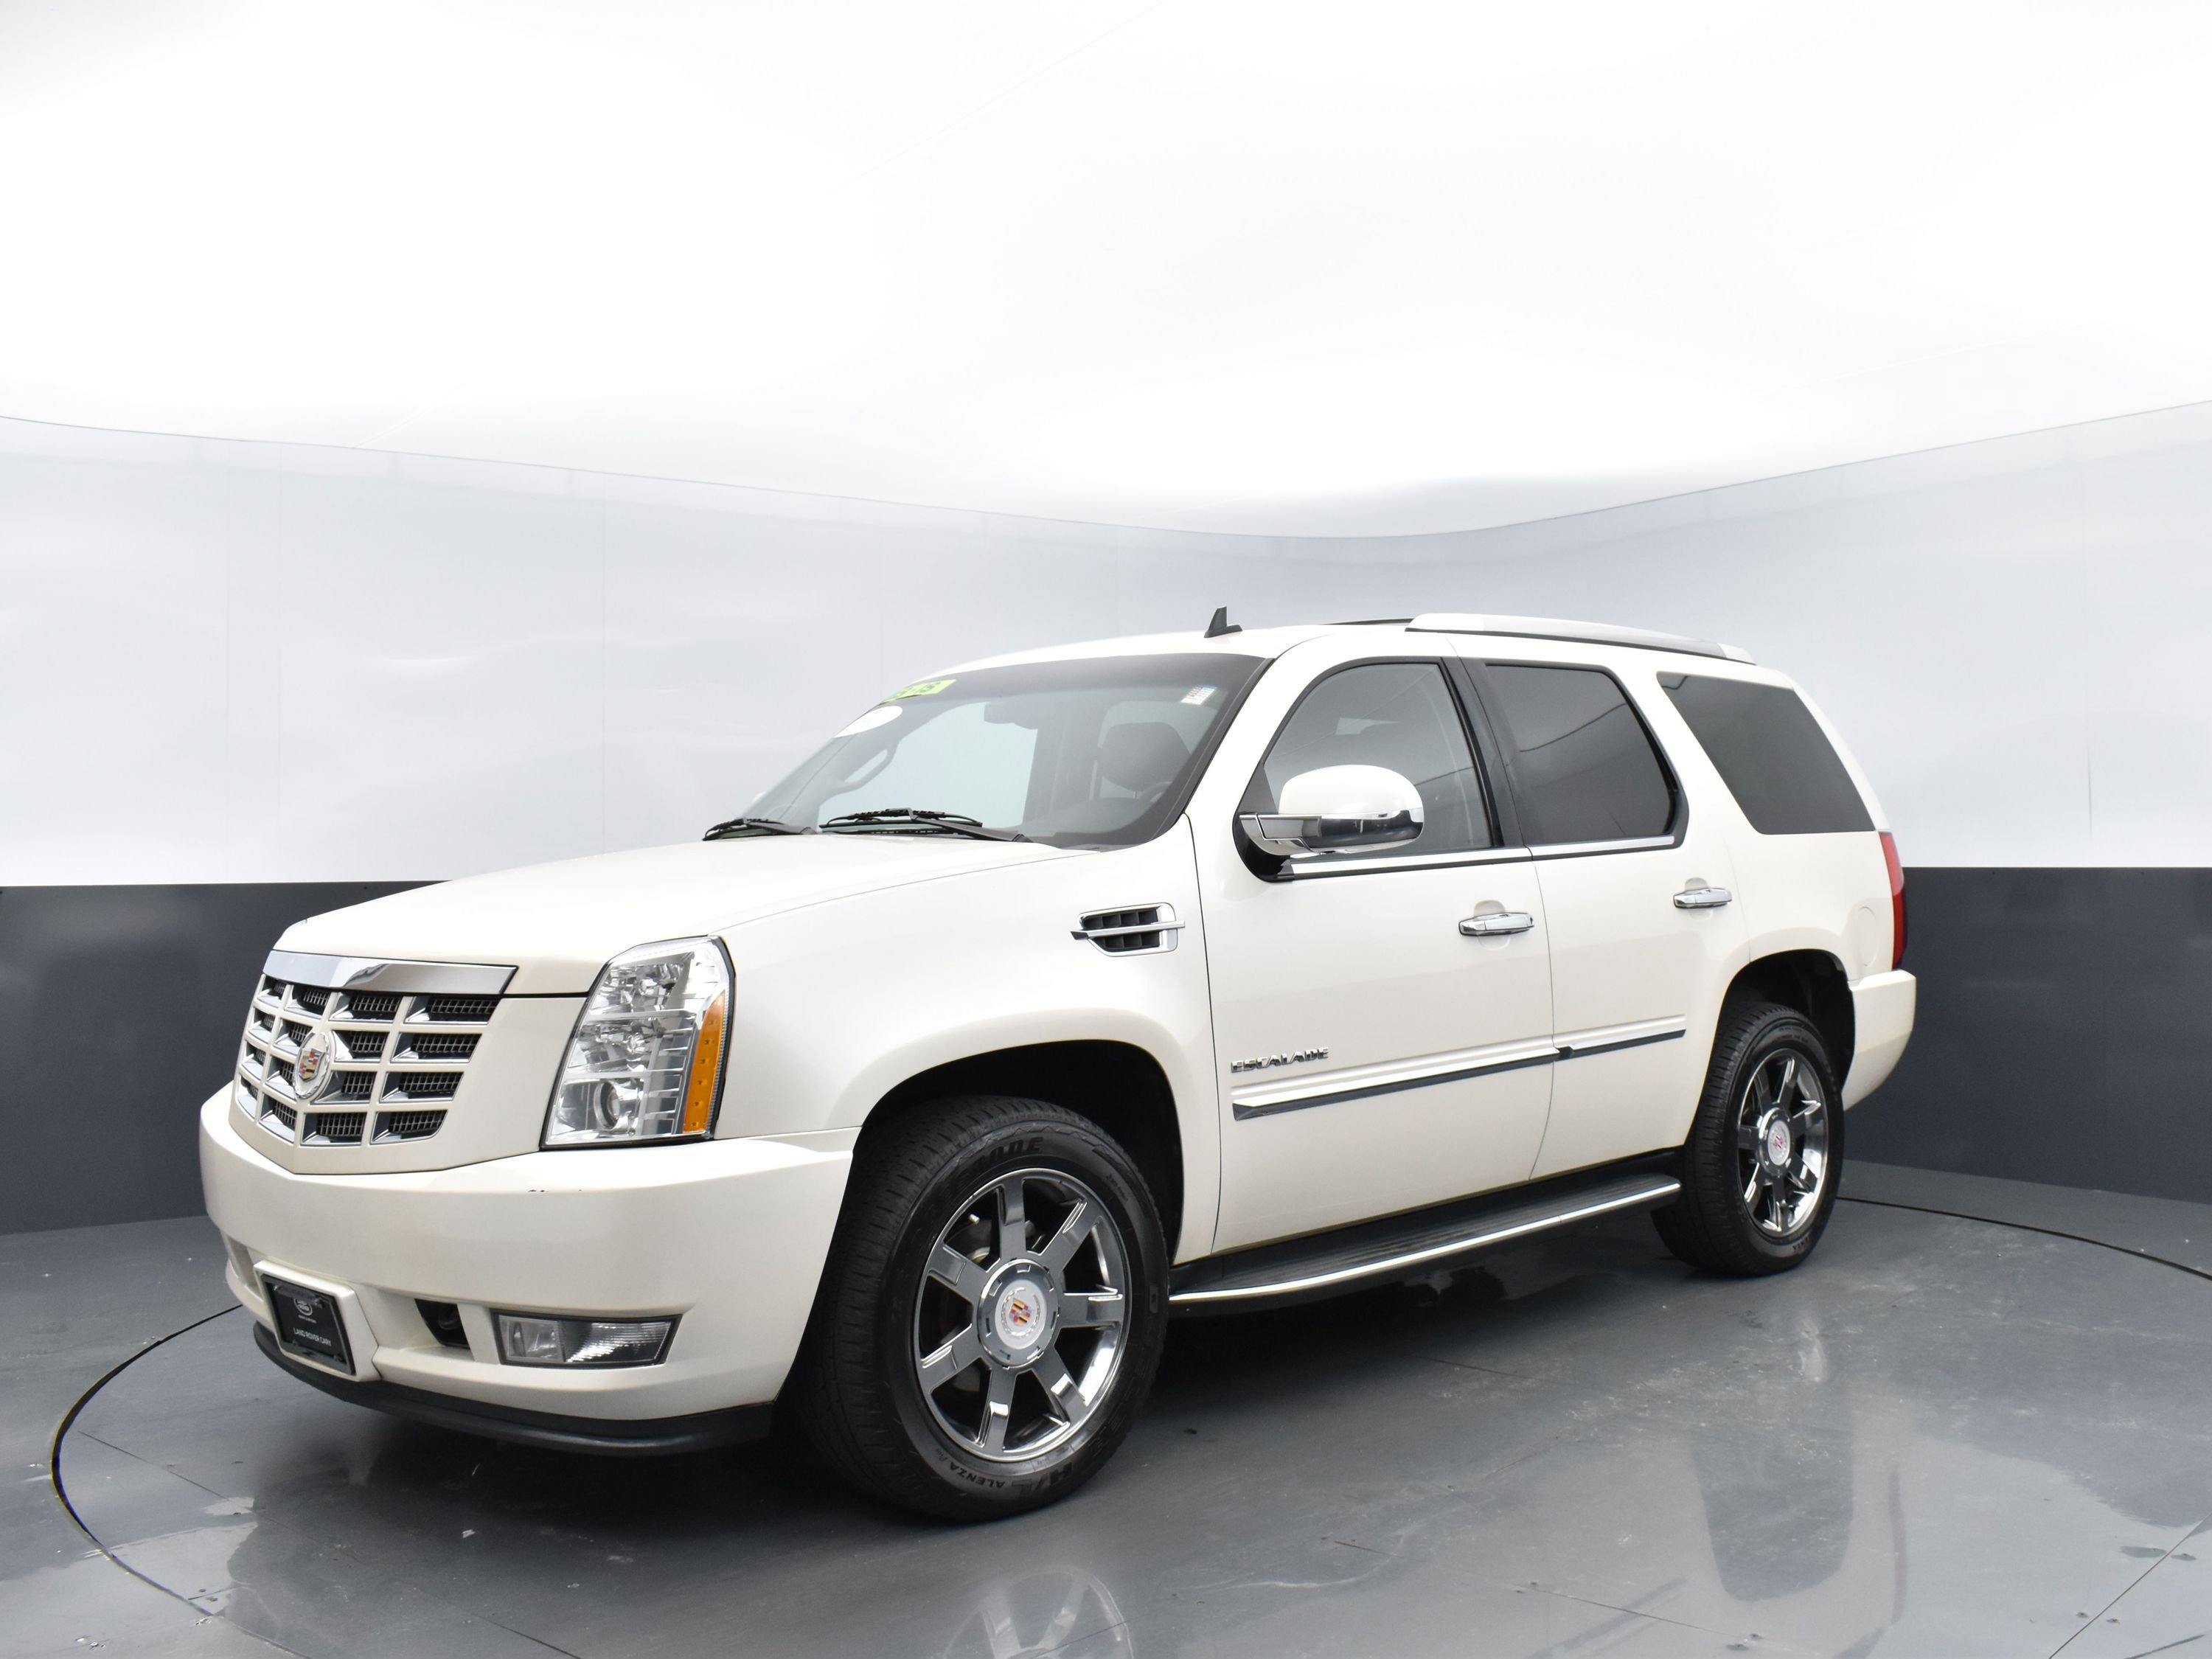 Used 2013 Cadillac Escalade for Sale Near Me in Durham, NC - Autotrader